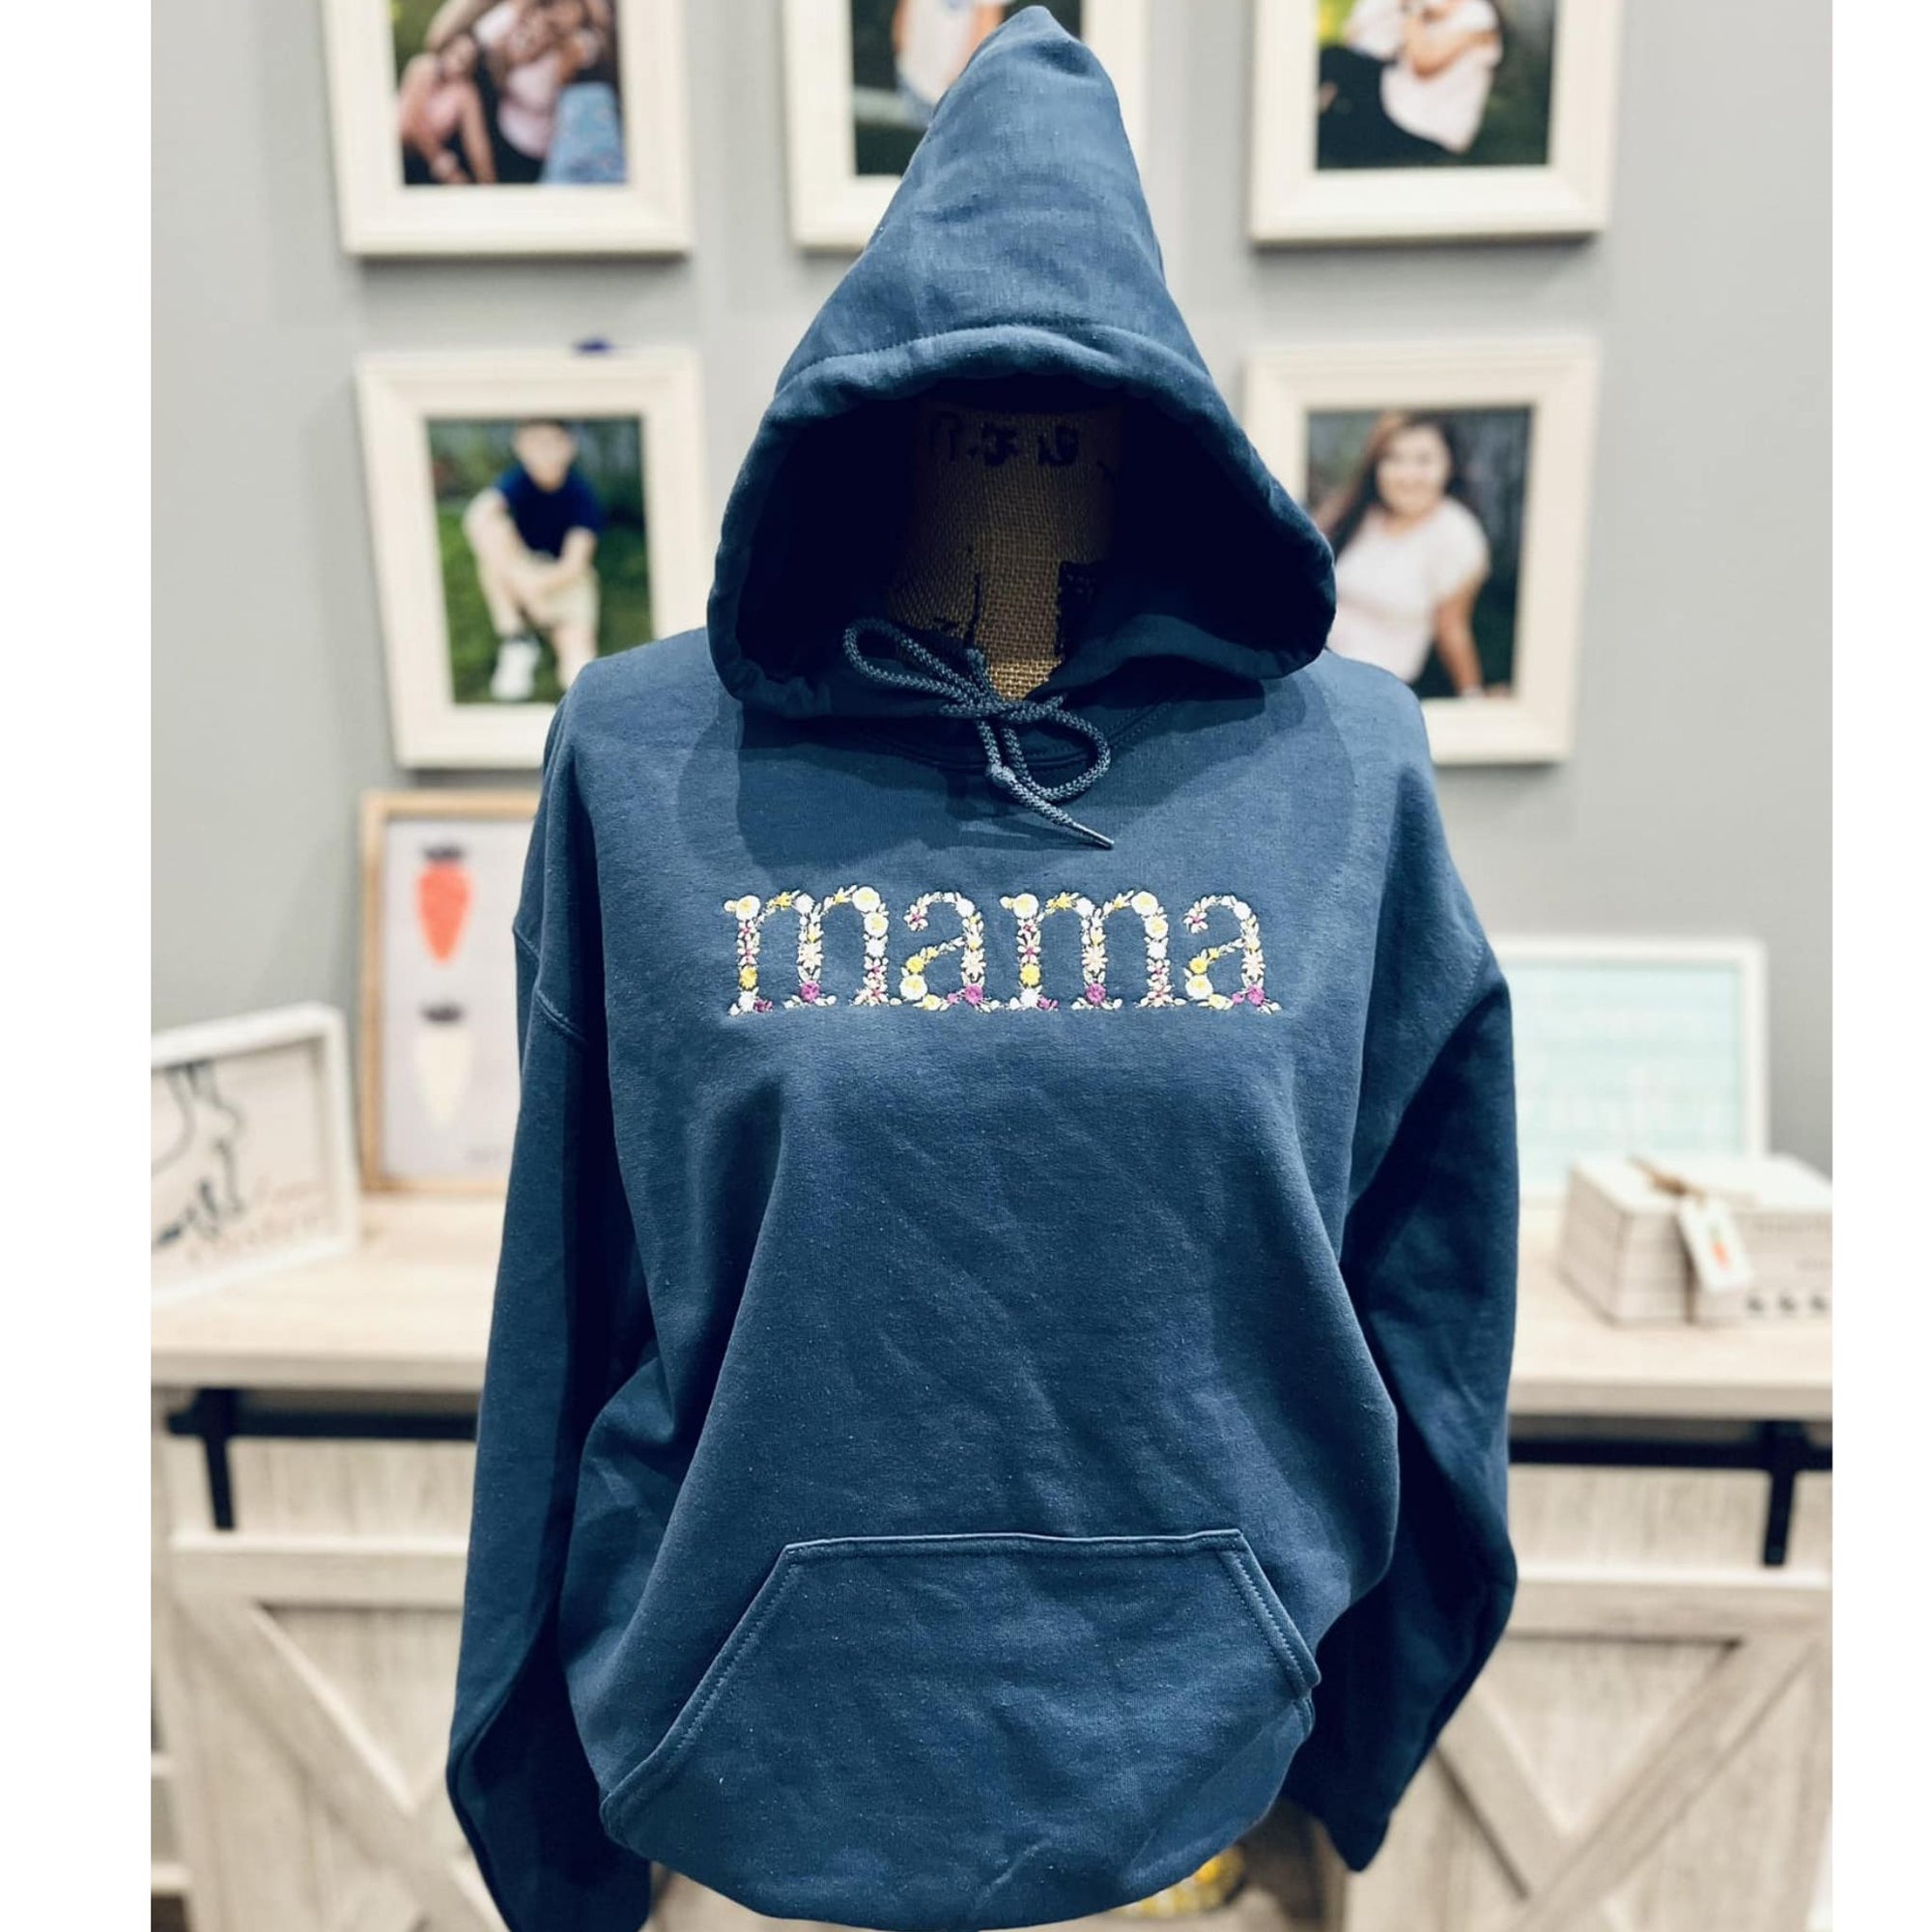 Custom Mama Floral Embroidered Hoodie With Kids Name On Sleeve, Gift For Mother's Day